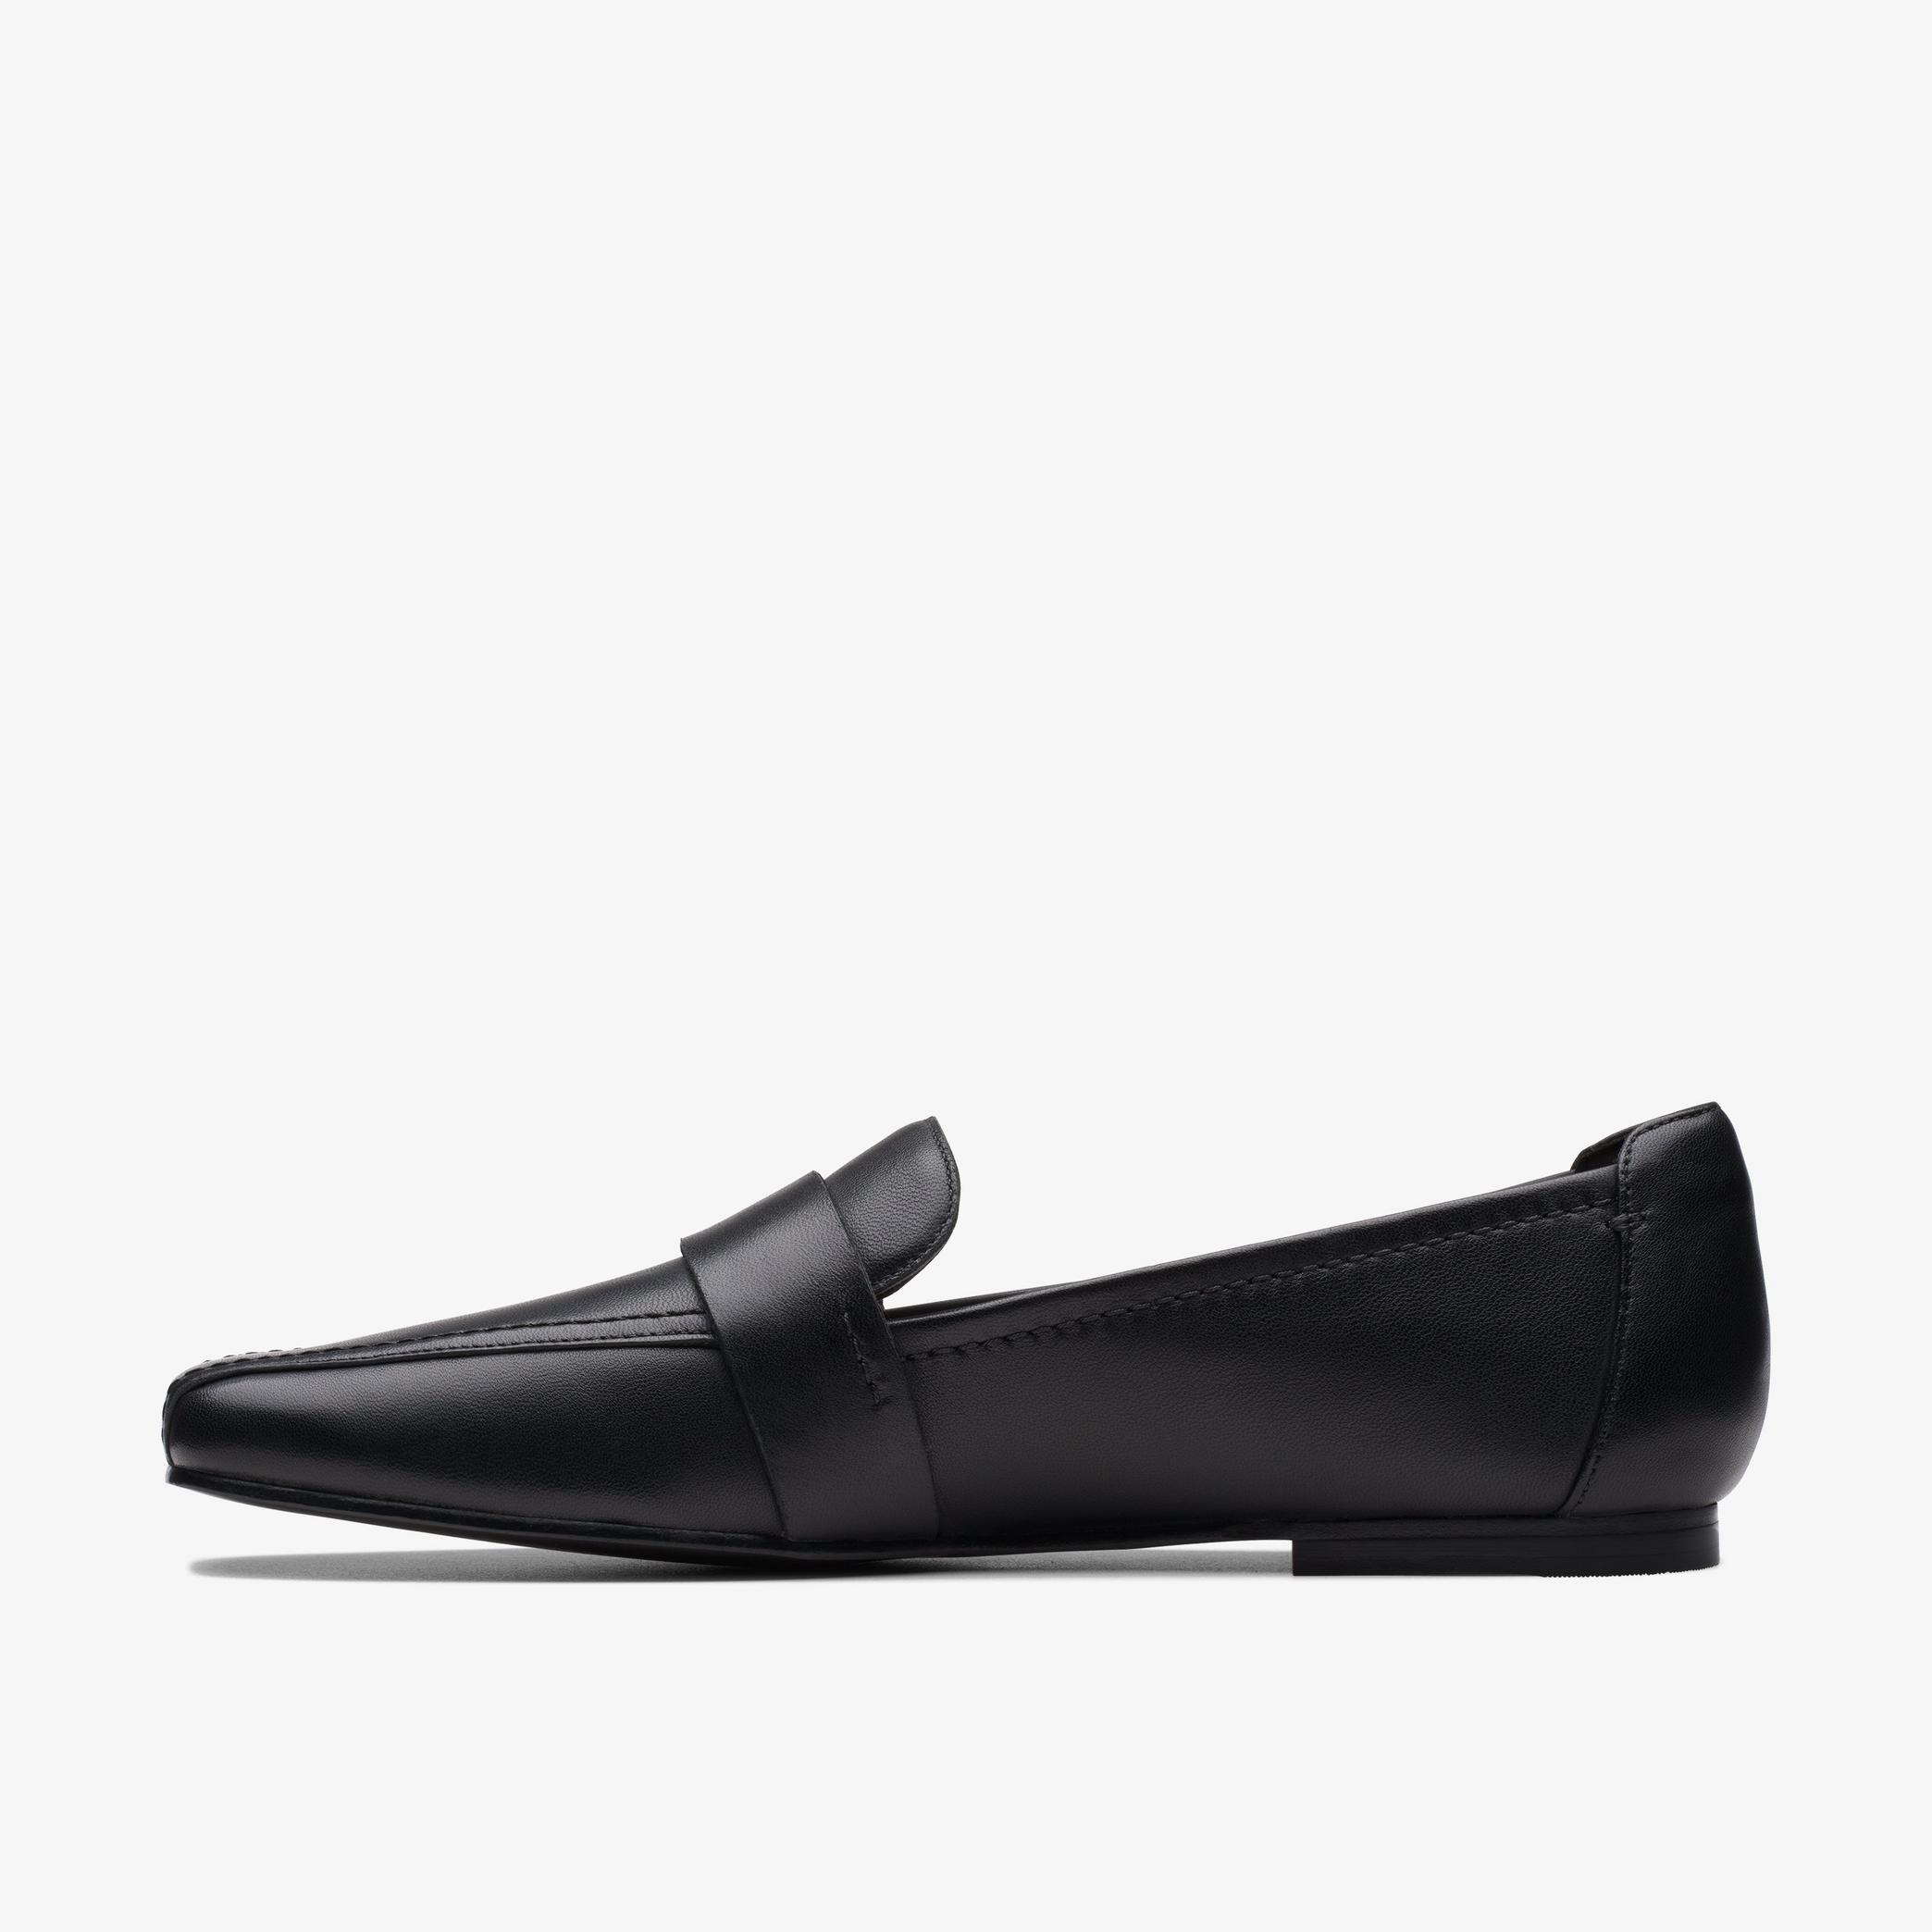 Seren Flat Black Leather Loafers, view 2 of 6